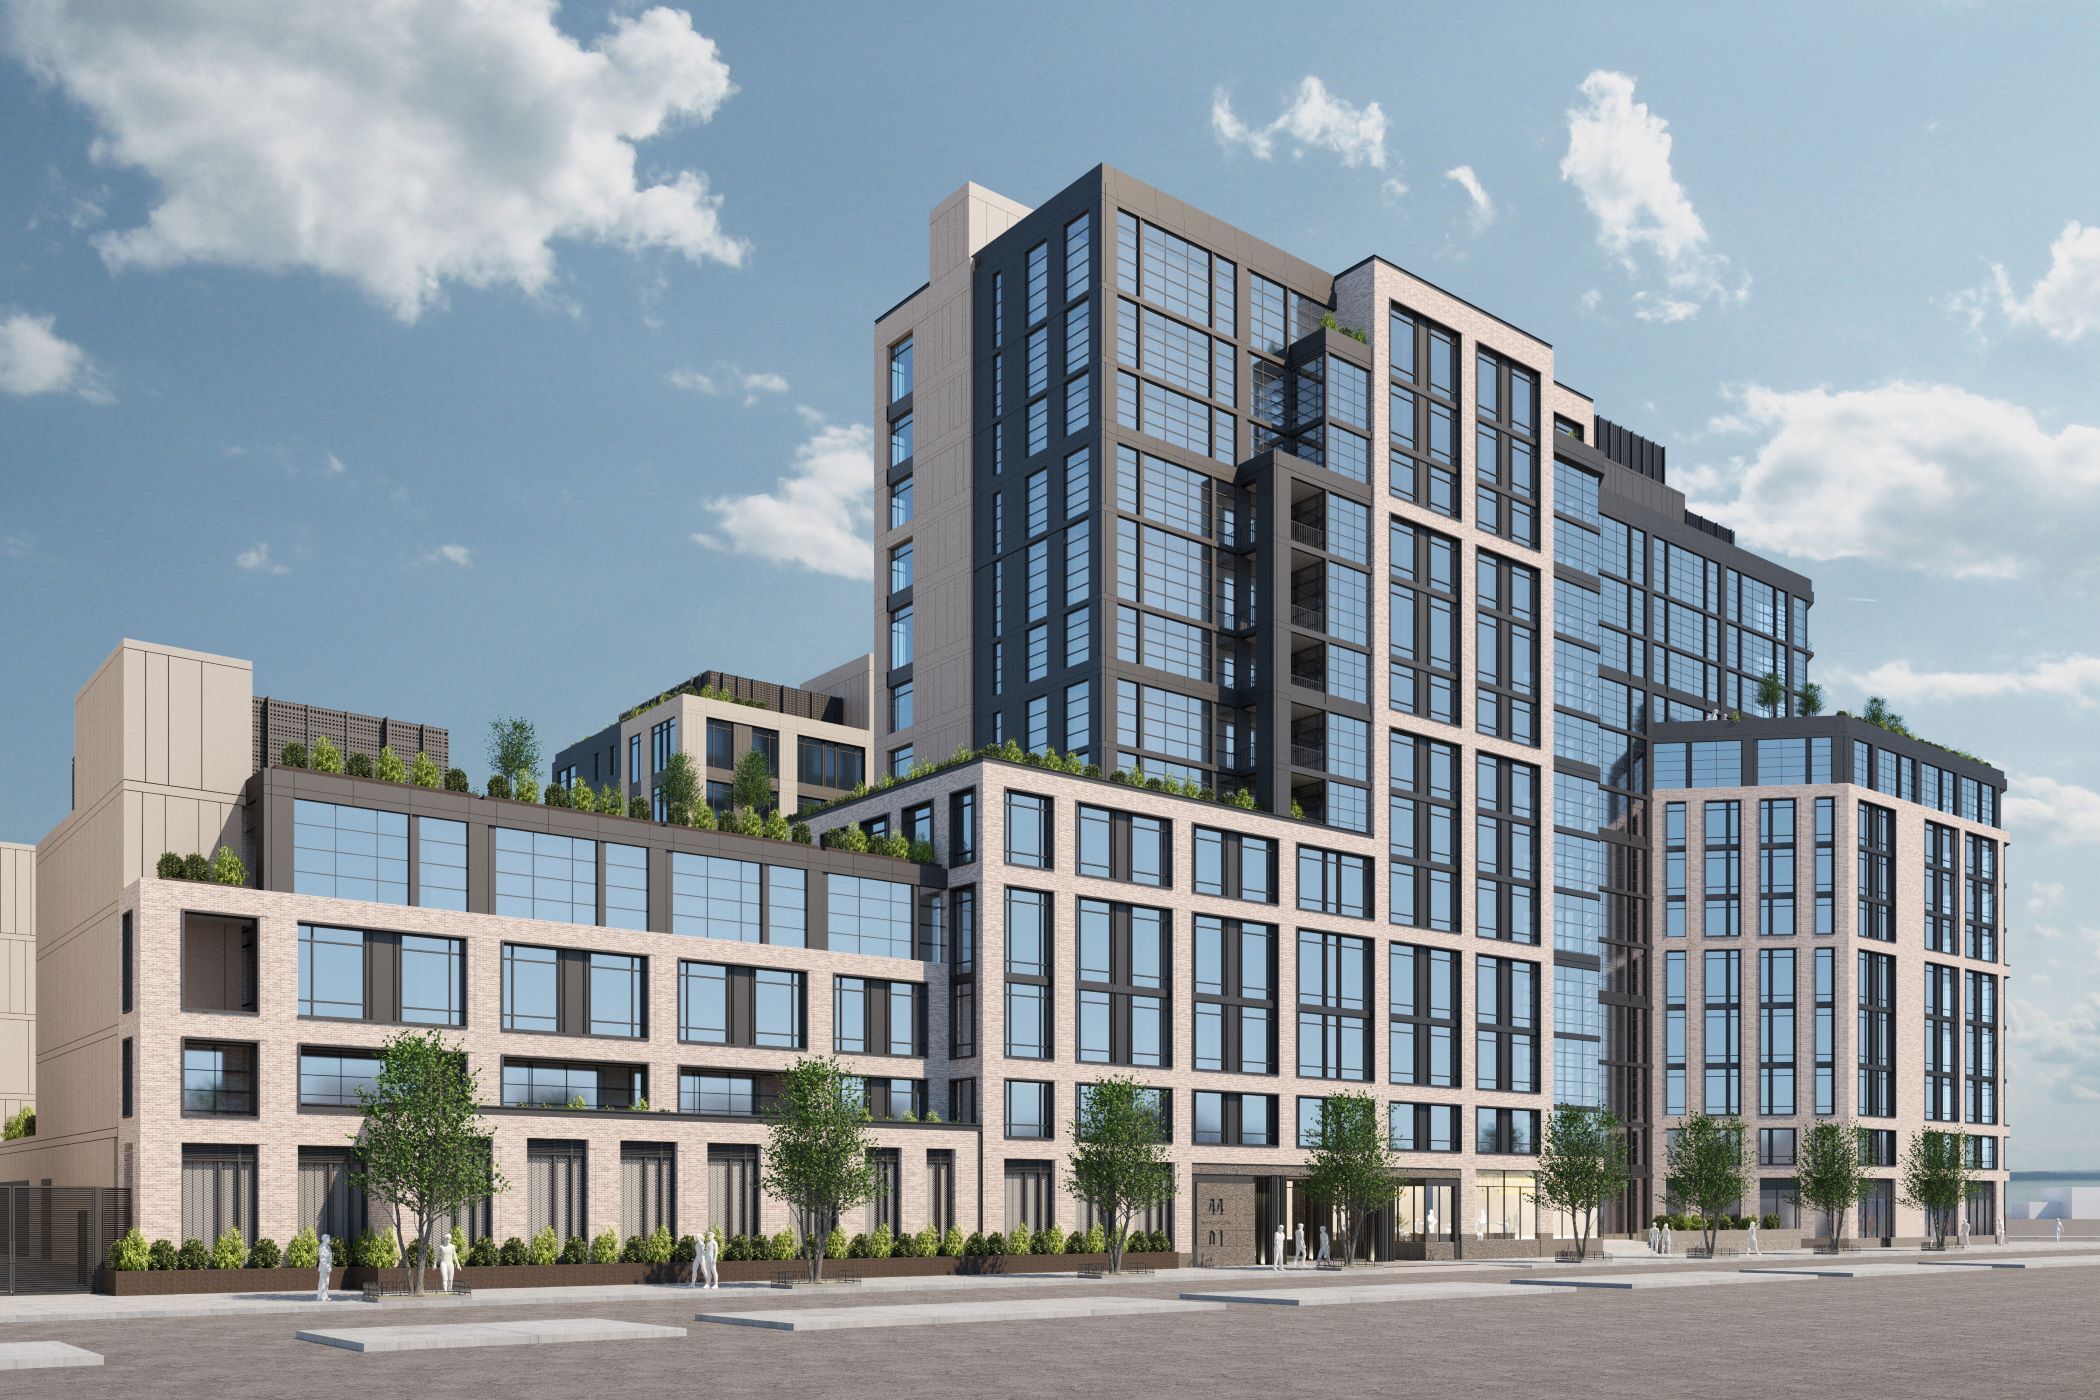 Silverstein Properties and Cantor Fitzgerald have landed a $165 million construction loan for 44-01 Northern Blvd. in Queens, New York. (Silverstein)